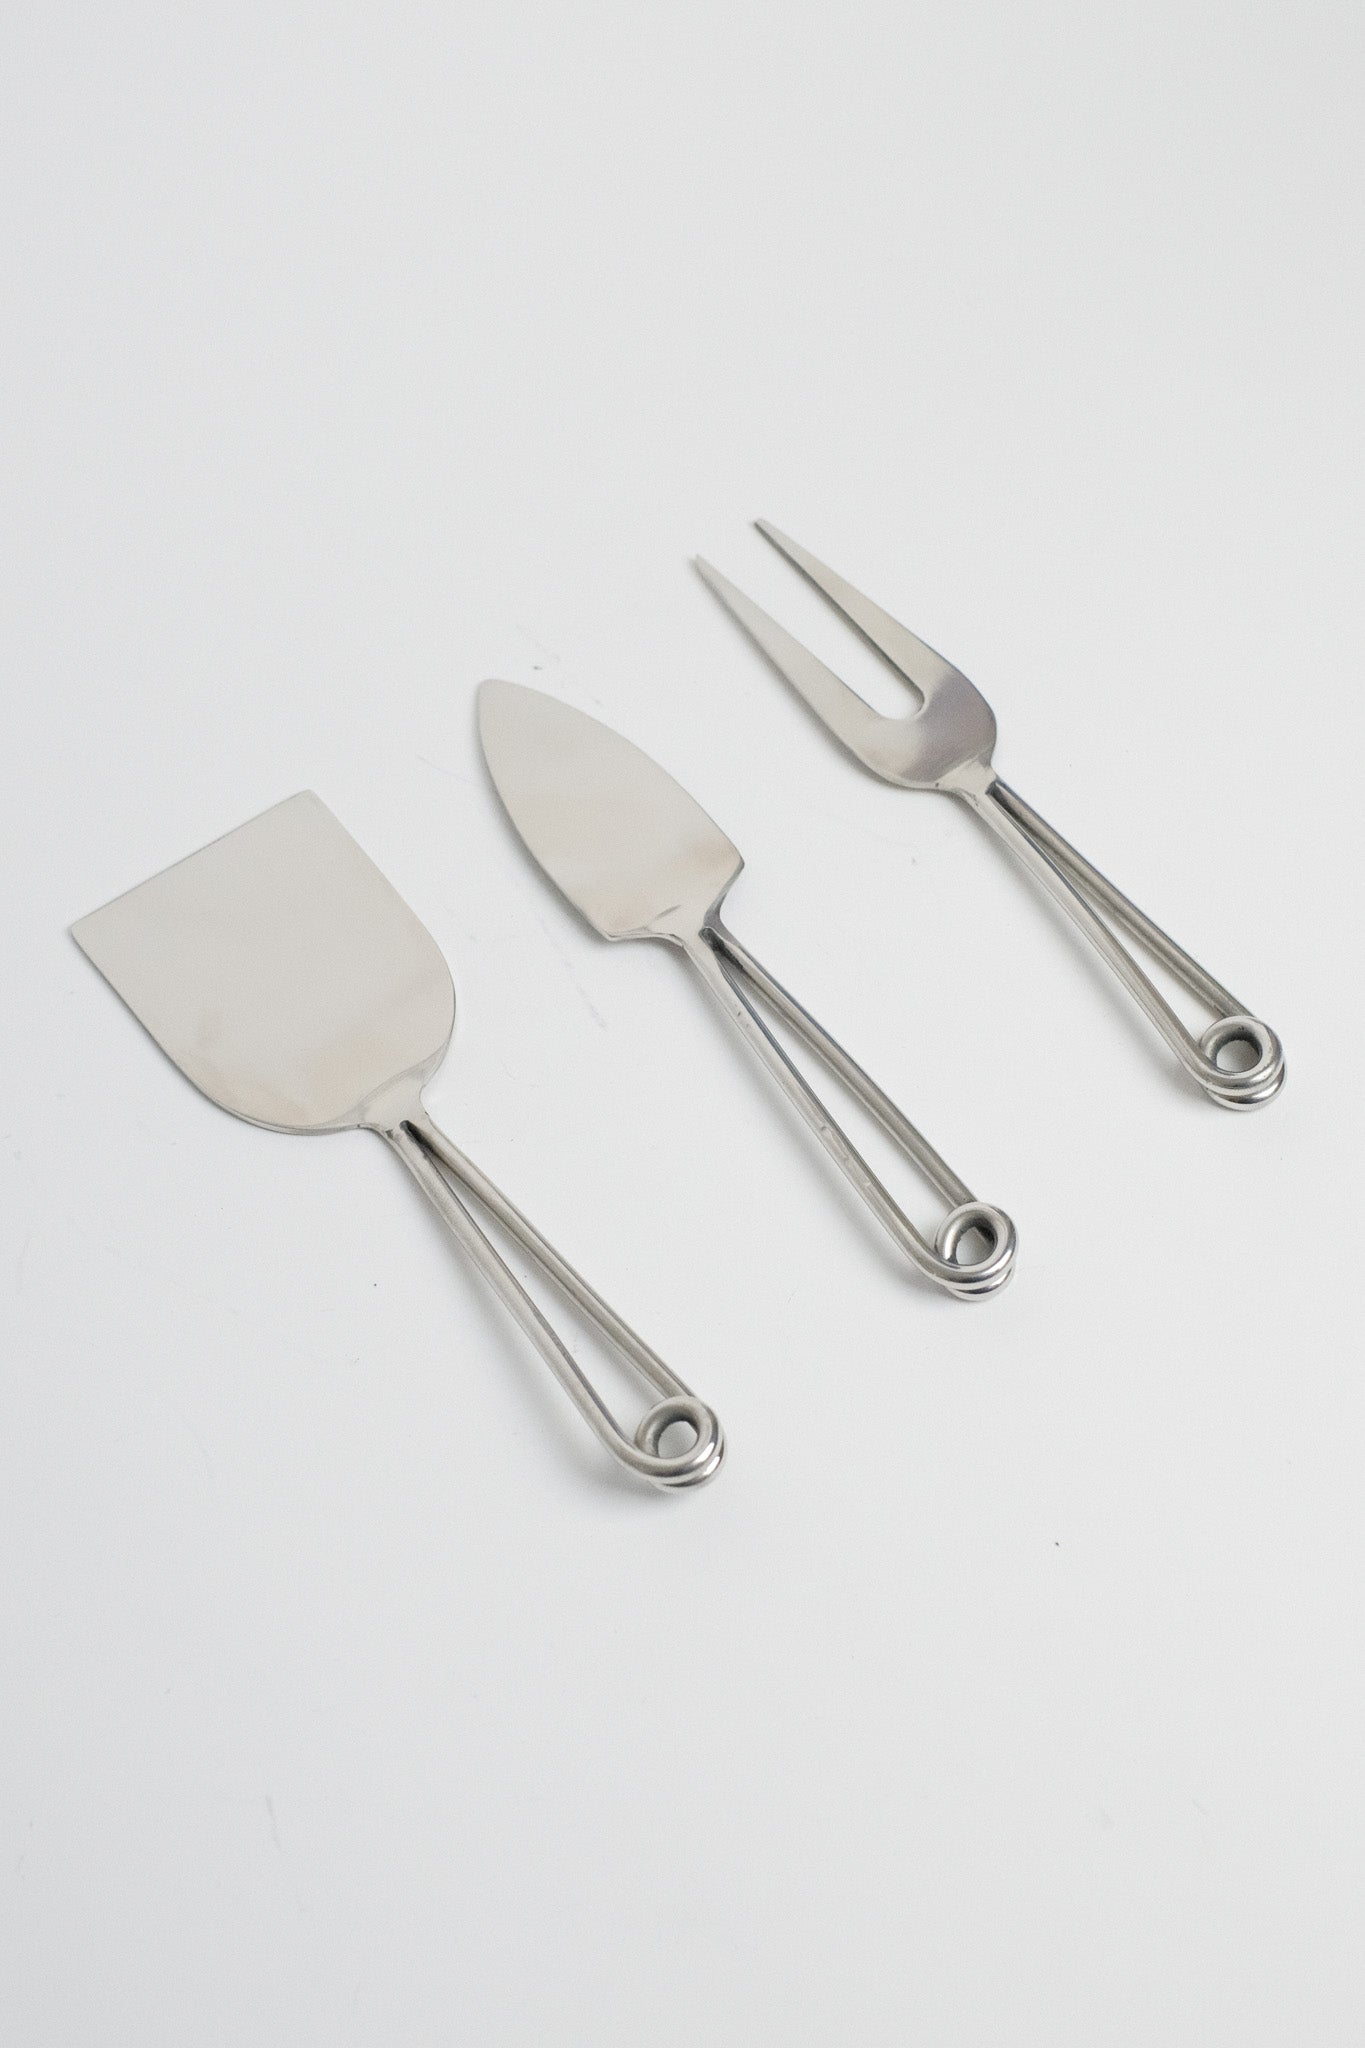 Stainless Steel Coil Cheese Knife Set of 3